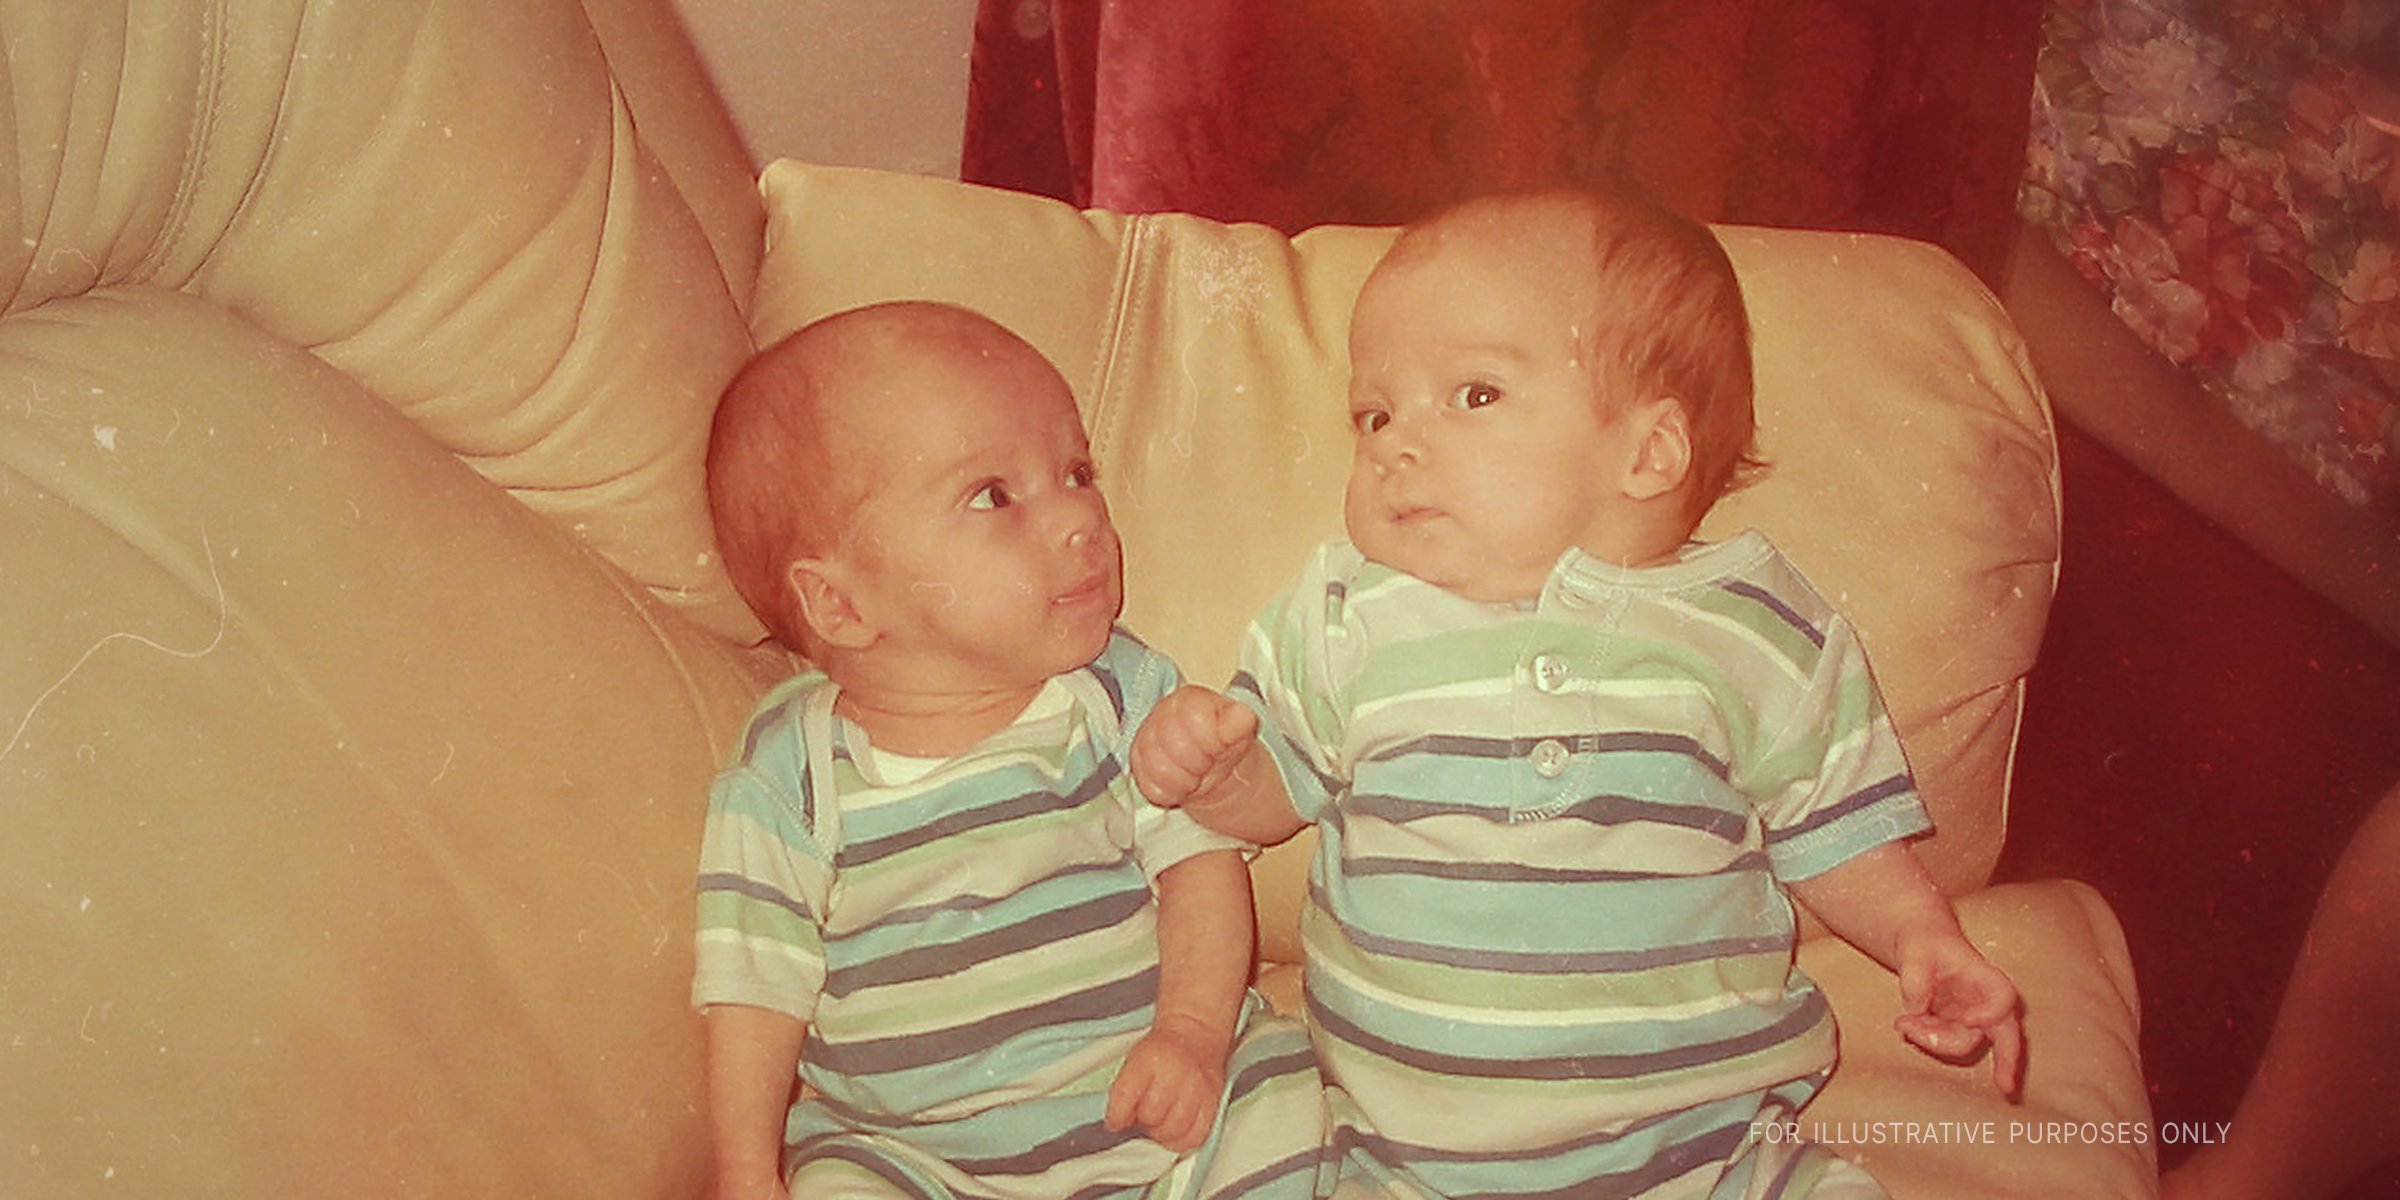 Twin babies on a couch. | Source: Flickr/goldberg (CC BY 2.0)